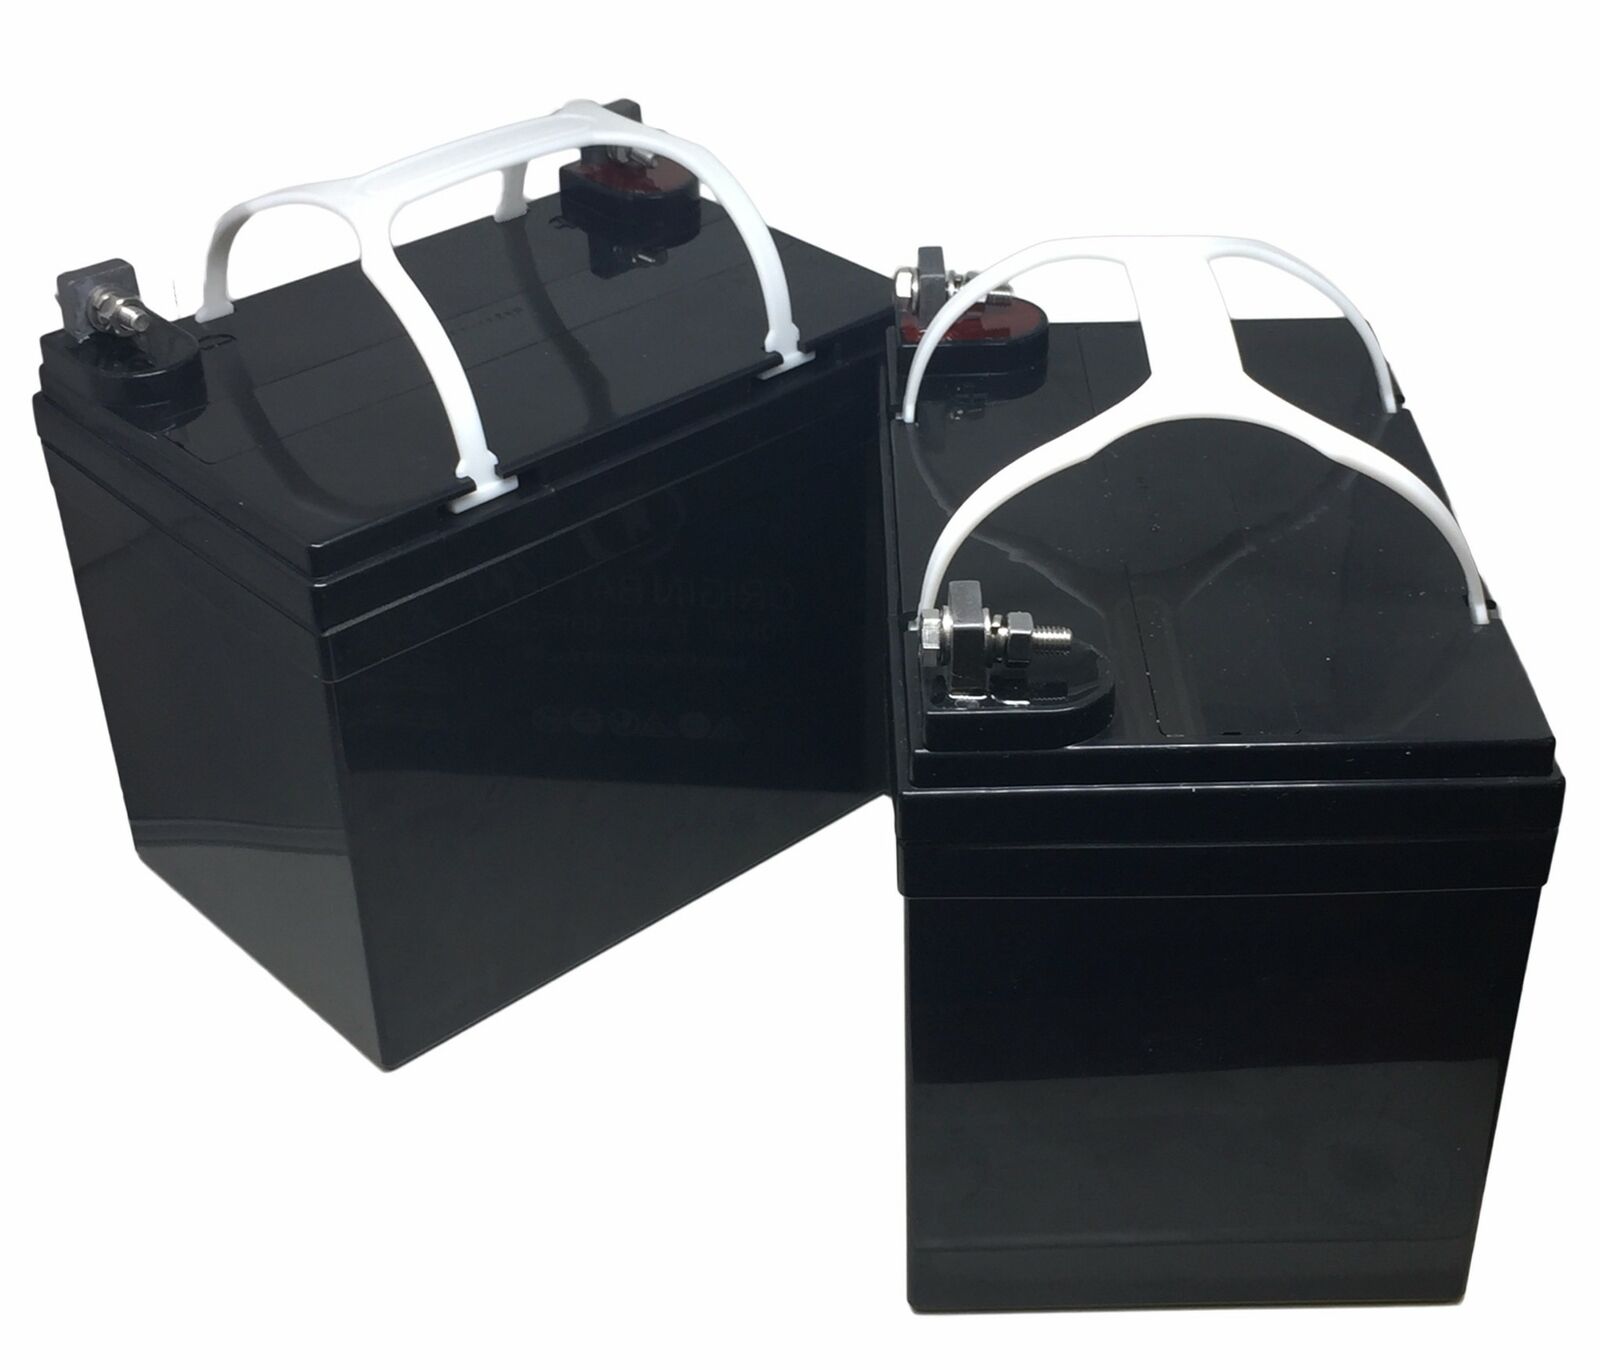 Jet 3 Ultra Power Chair Battery Kit, Also Fits Jet 7, Jet 3, and Jet 10 Models